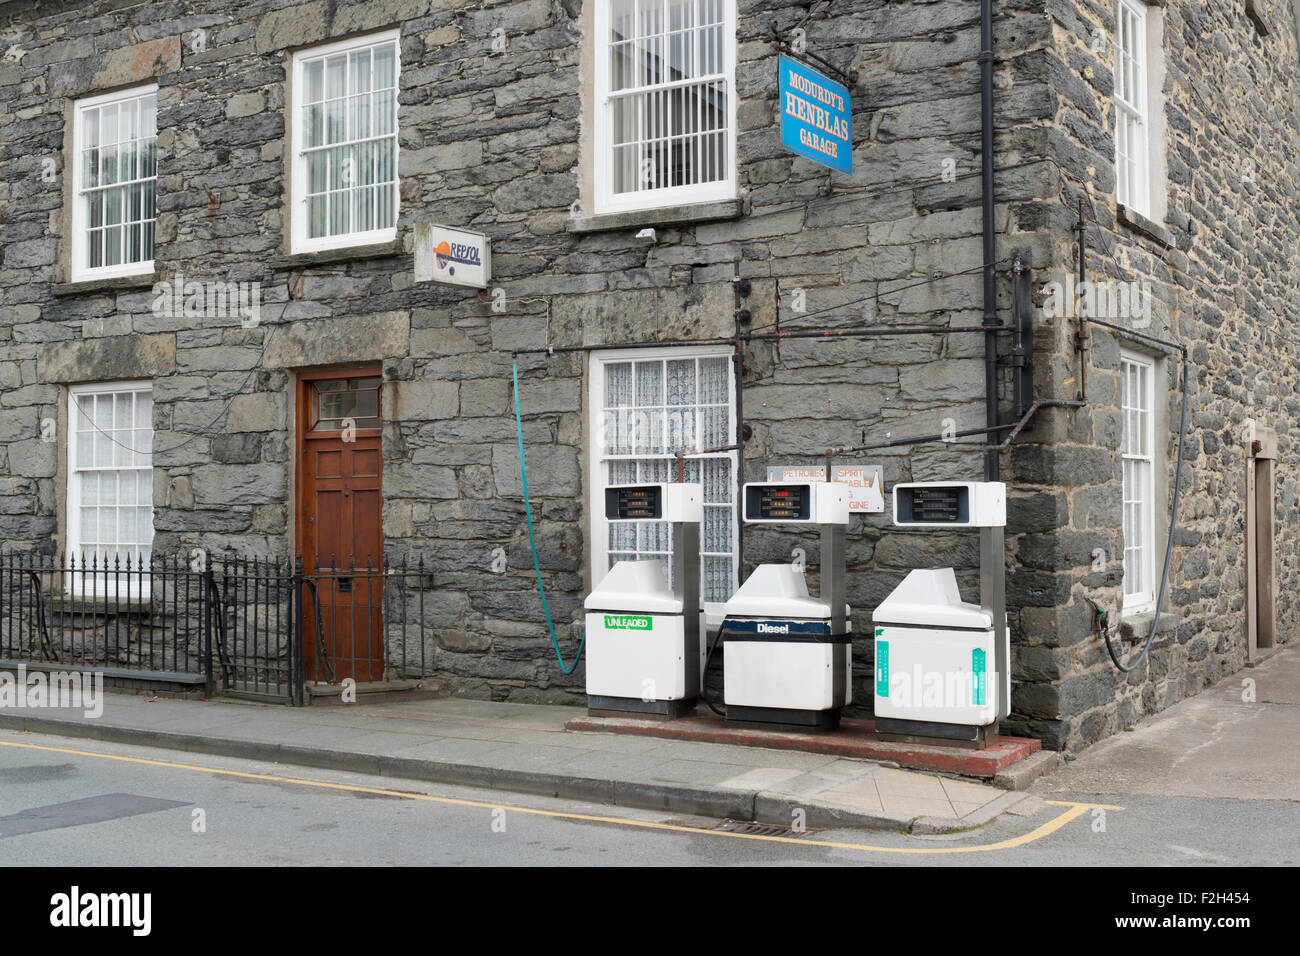 A small quirky petrol filling station in the small Welsh town of Bala in Gwynedd in Wales, UK. Stock Photo